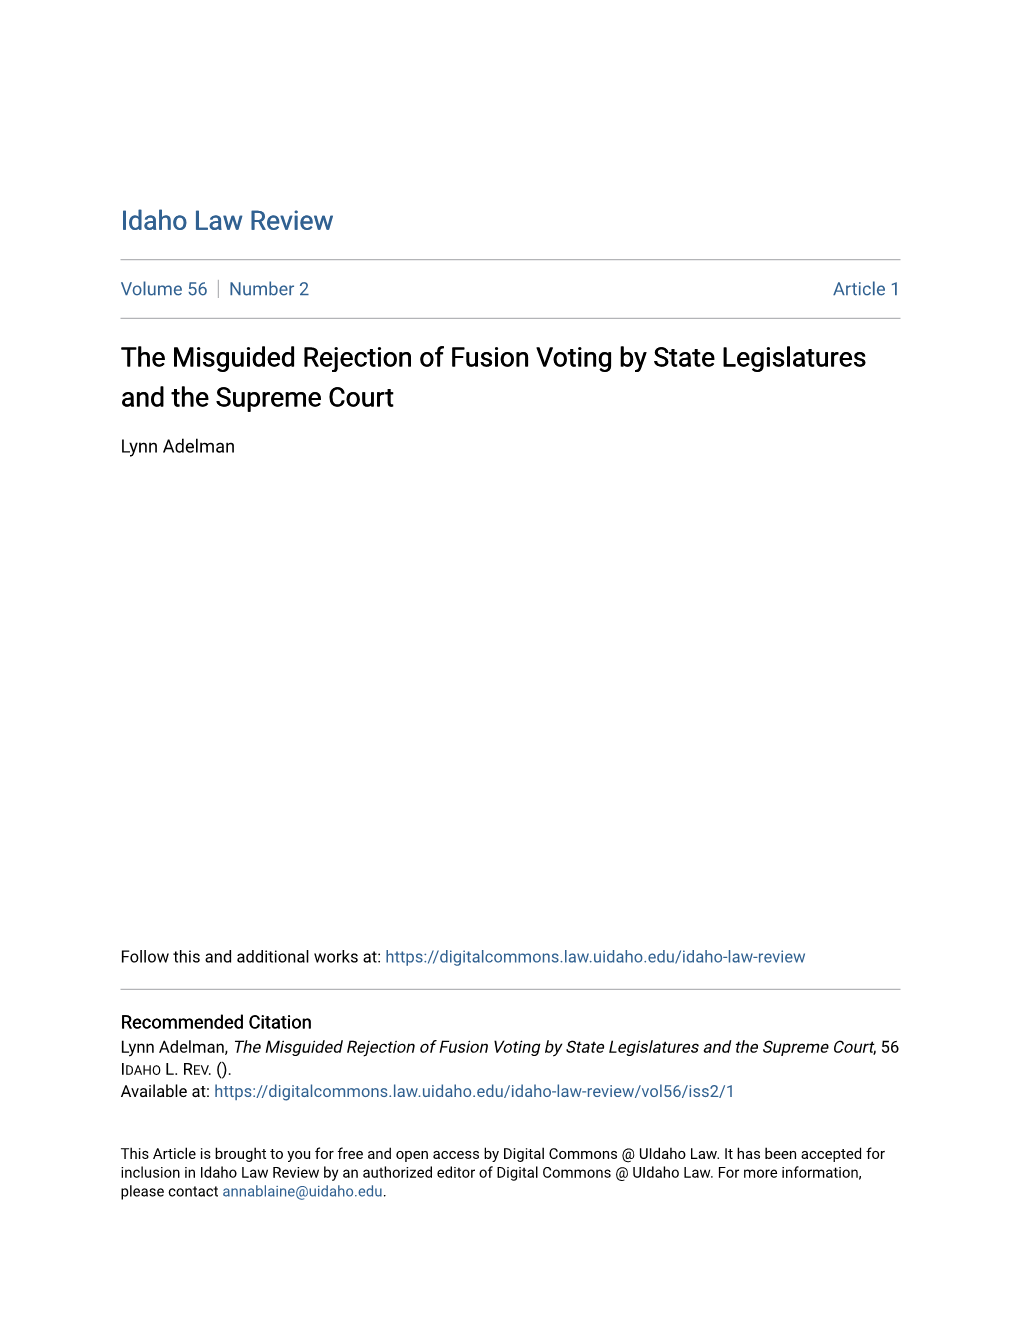 The Misguided Rejection of Fusion Voting by State Legislatures and the Supreme Court